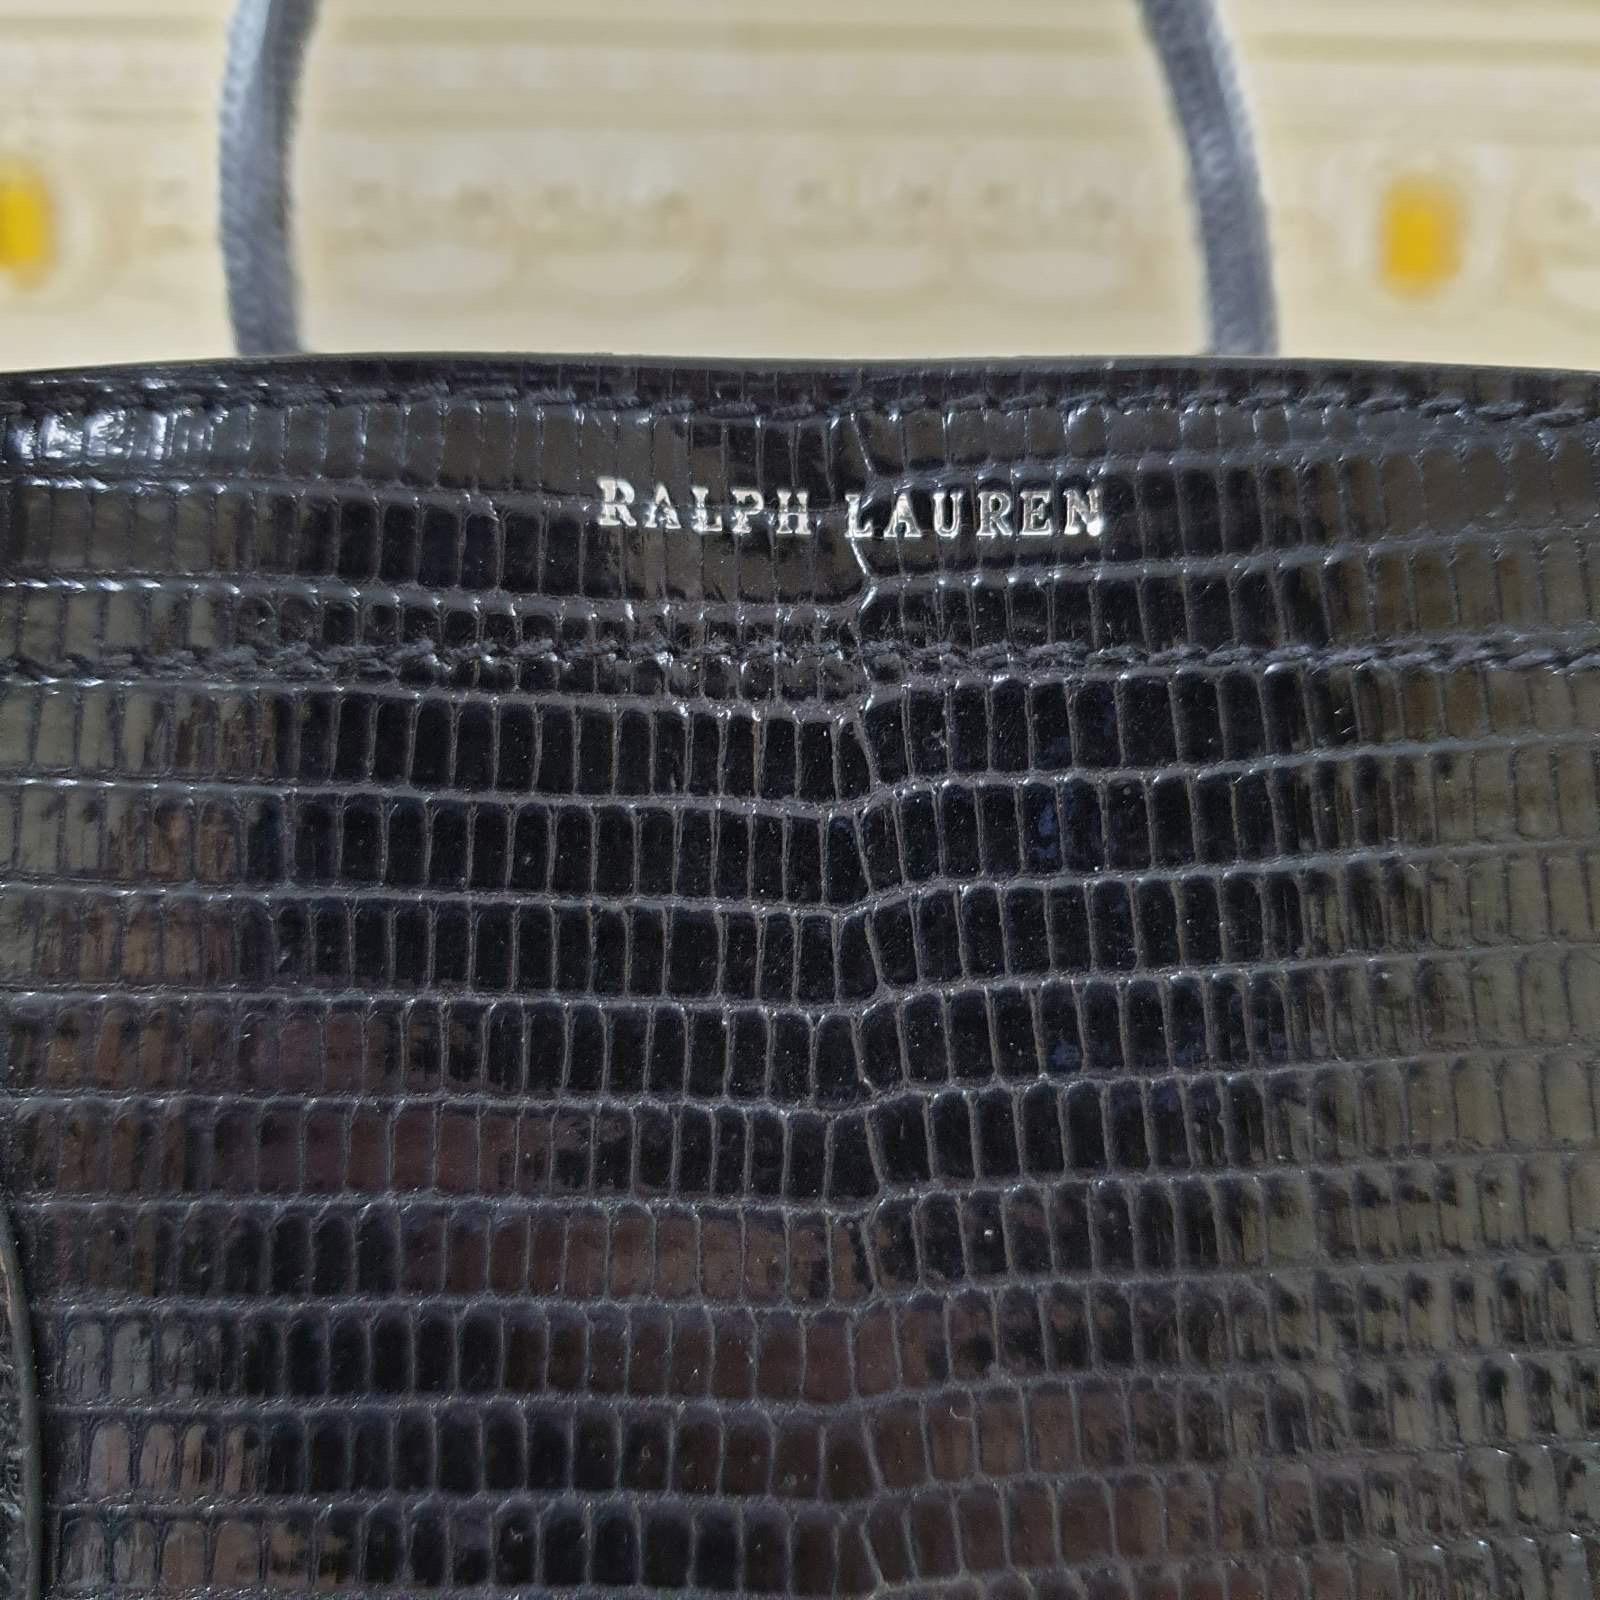 This Ralph Lauren Ricky bag is simply breathtaking and ideal to complement your elegant personality. Meticulously crafted from exotic crocodile, lizard and python skin, the bag has an intriguing visual and tactile finish which makes it all the more